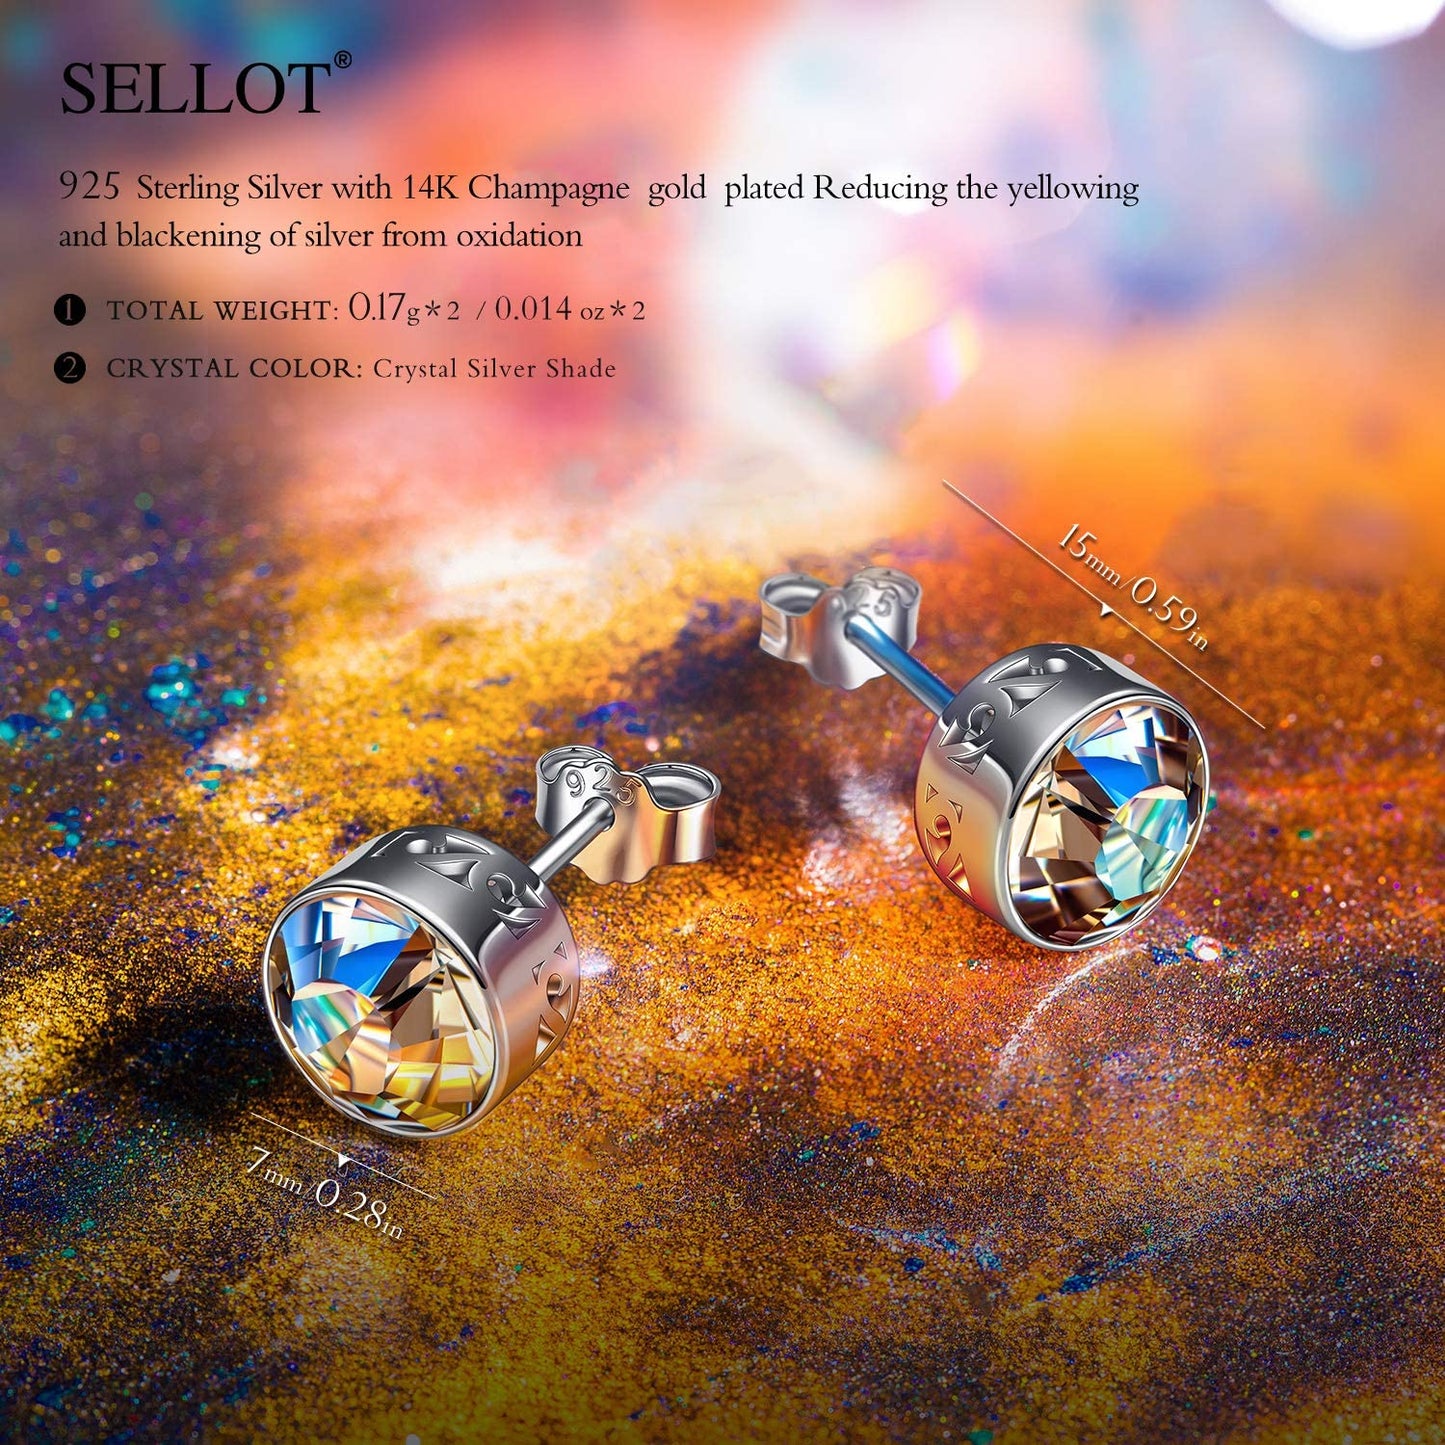 Sellot Earrings for Women King Crown 925 Sterling Silver Stud Earrings Bezel-Setting with Round Cut Crystals Jewelry for Women Girls Lady with Gift Box, 6mm/7mm/8mm